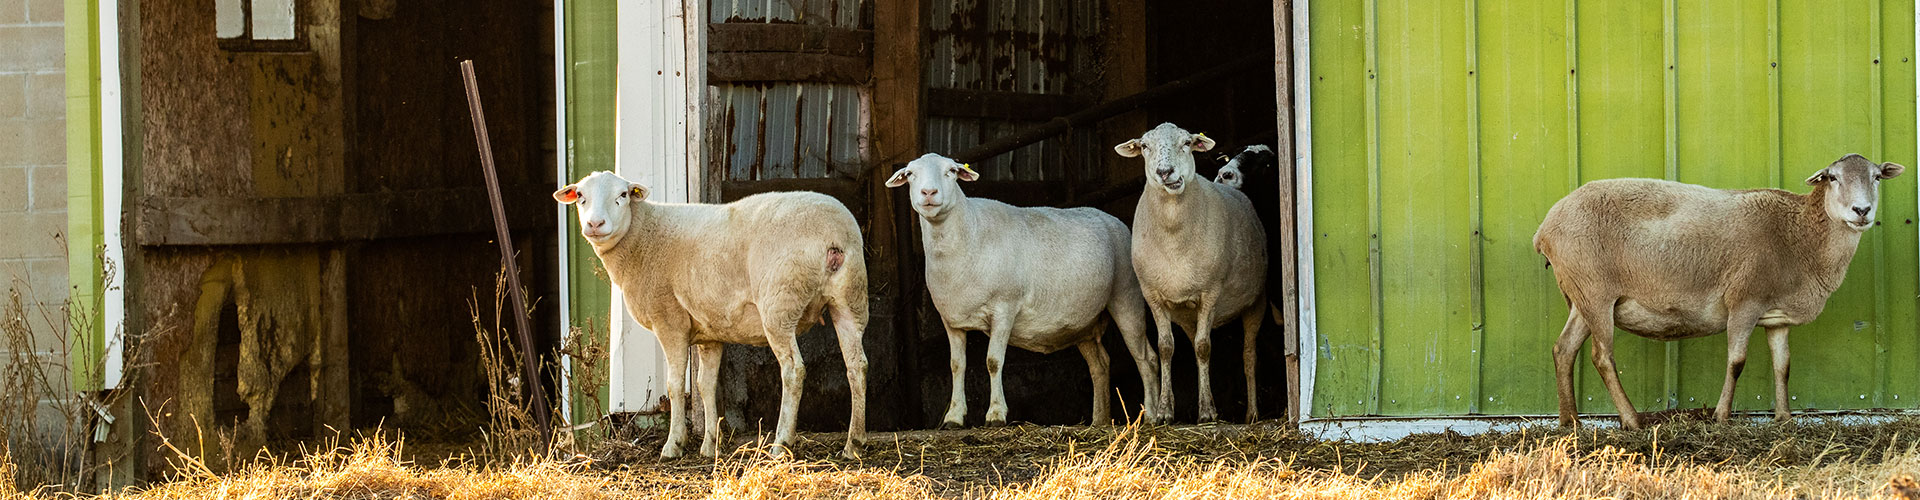 Sheep standing in the doorway of a barn